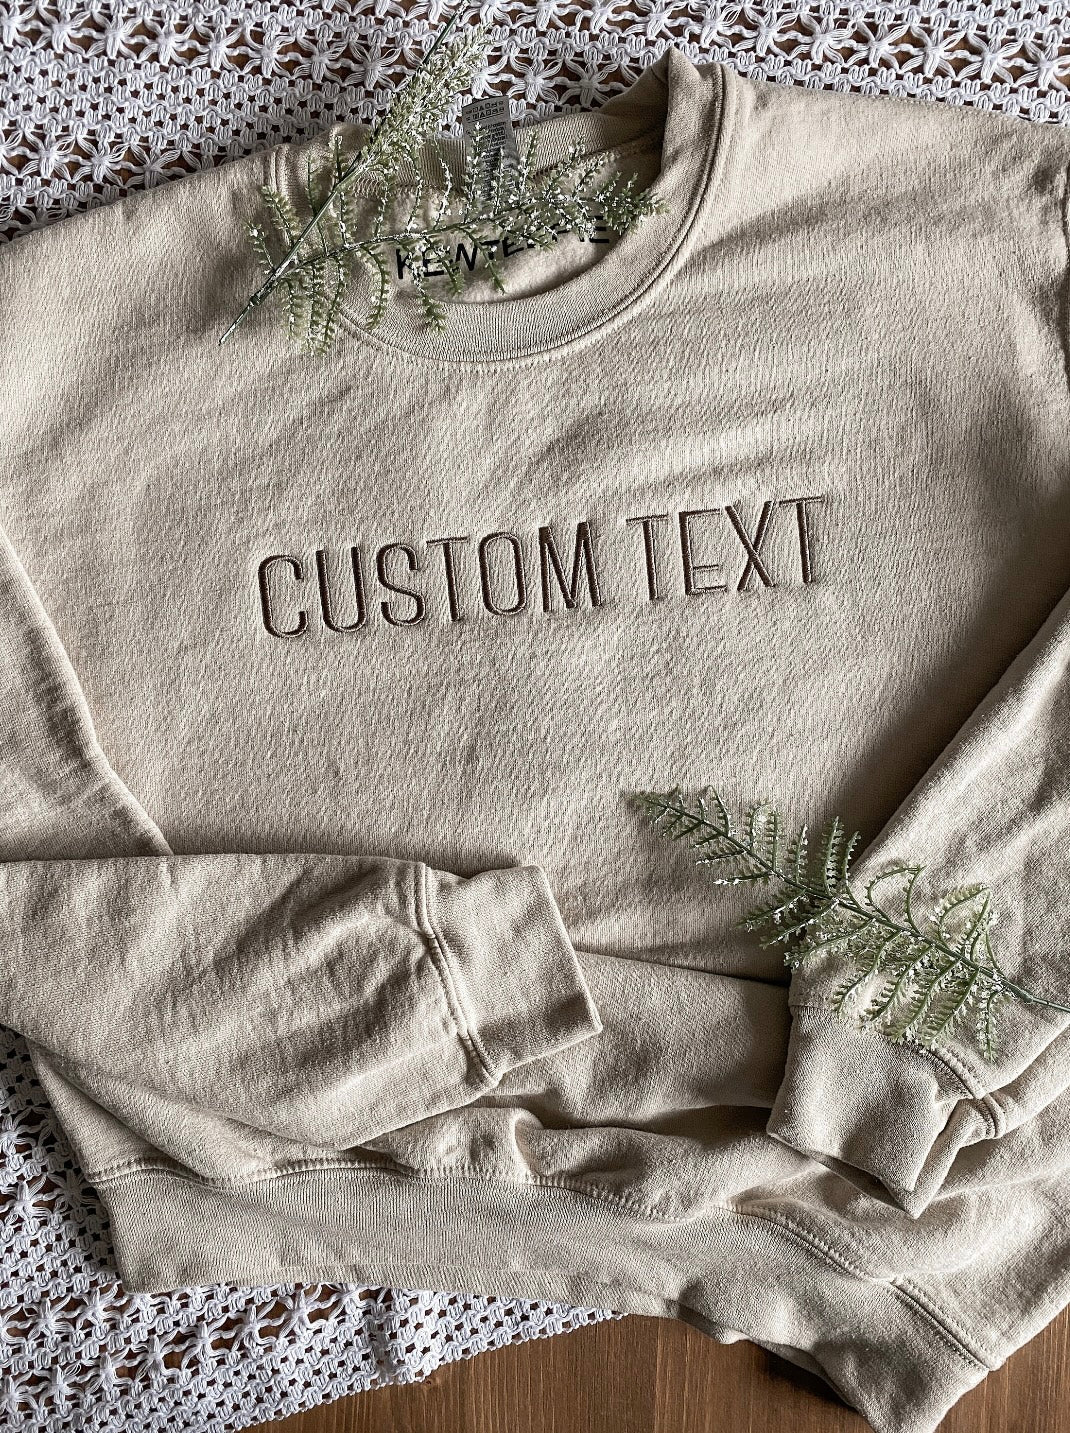 Custom Text Personalized Sweatshirt | Embroidered Apparel